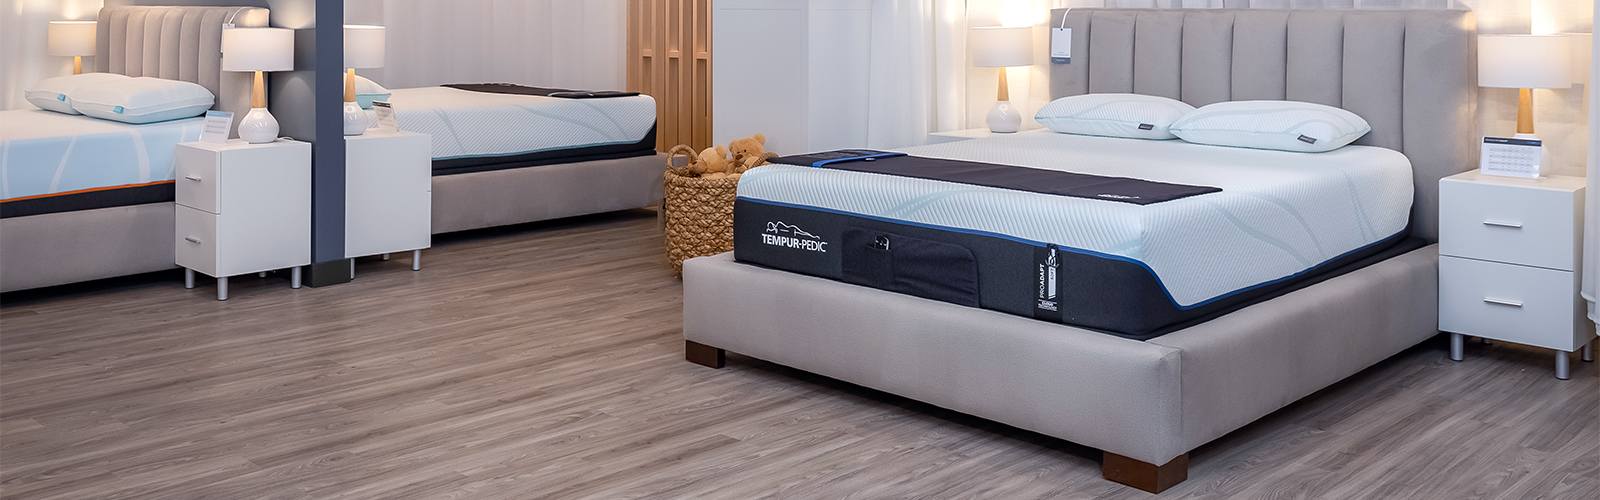 Tempur-Pedic ProAdapt Soft on display in a retail store